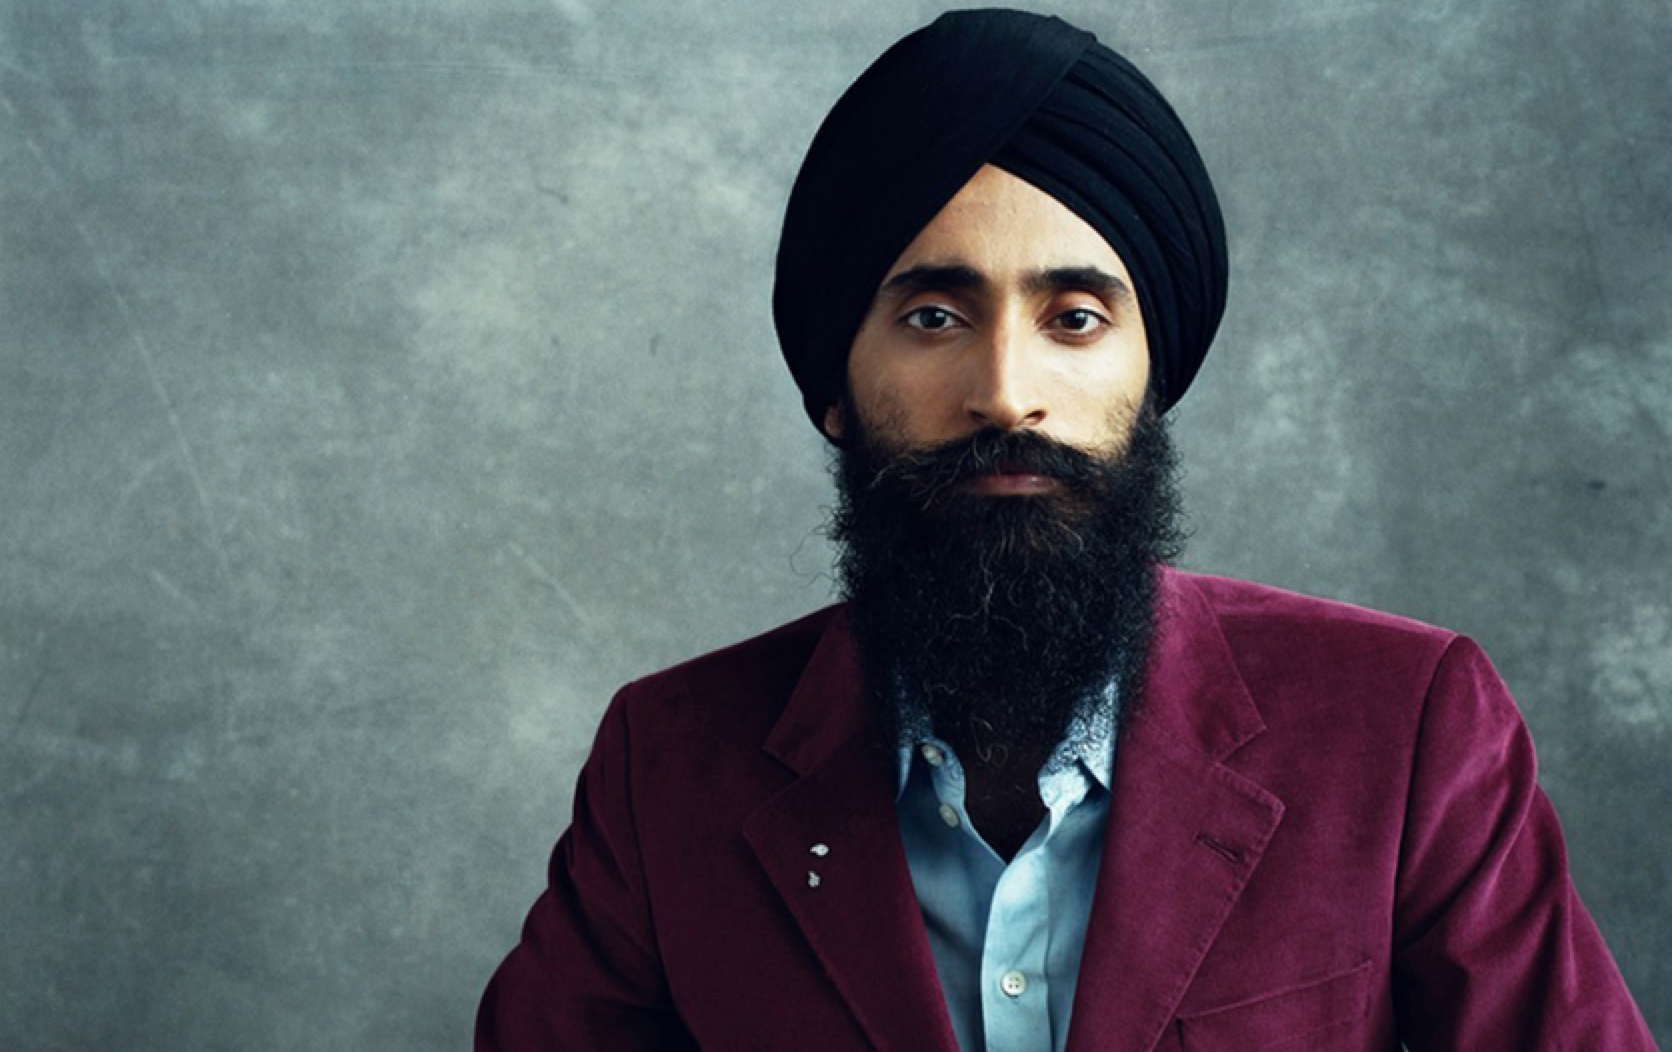 A turbaned American Sikh  actor is taking a stand after an 